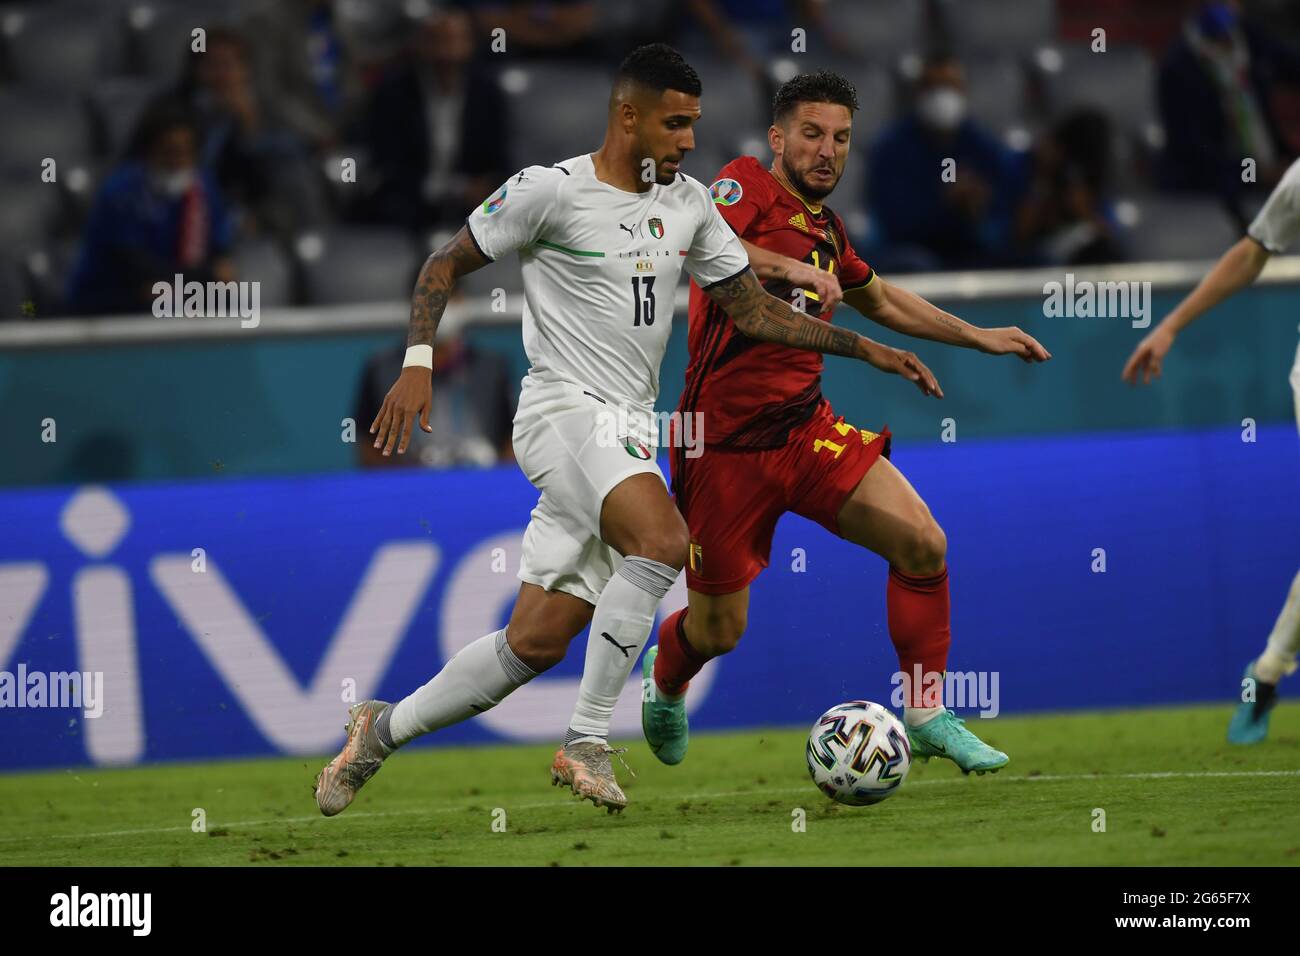 Munchen, Germany. 2nd July 2021. Emerson Palmieri (Italy)Dries Mertens (Belgium) during the Uefa 'European Championship 2020 Quarter-finals match between Belgium 1-2 Italy at Allianz Arena on July 02, 2021 in Munchen, Germany. Credit: Maurizio Borsari/AFLO/Alamy Live News Stock Photo